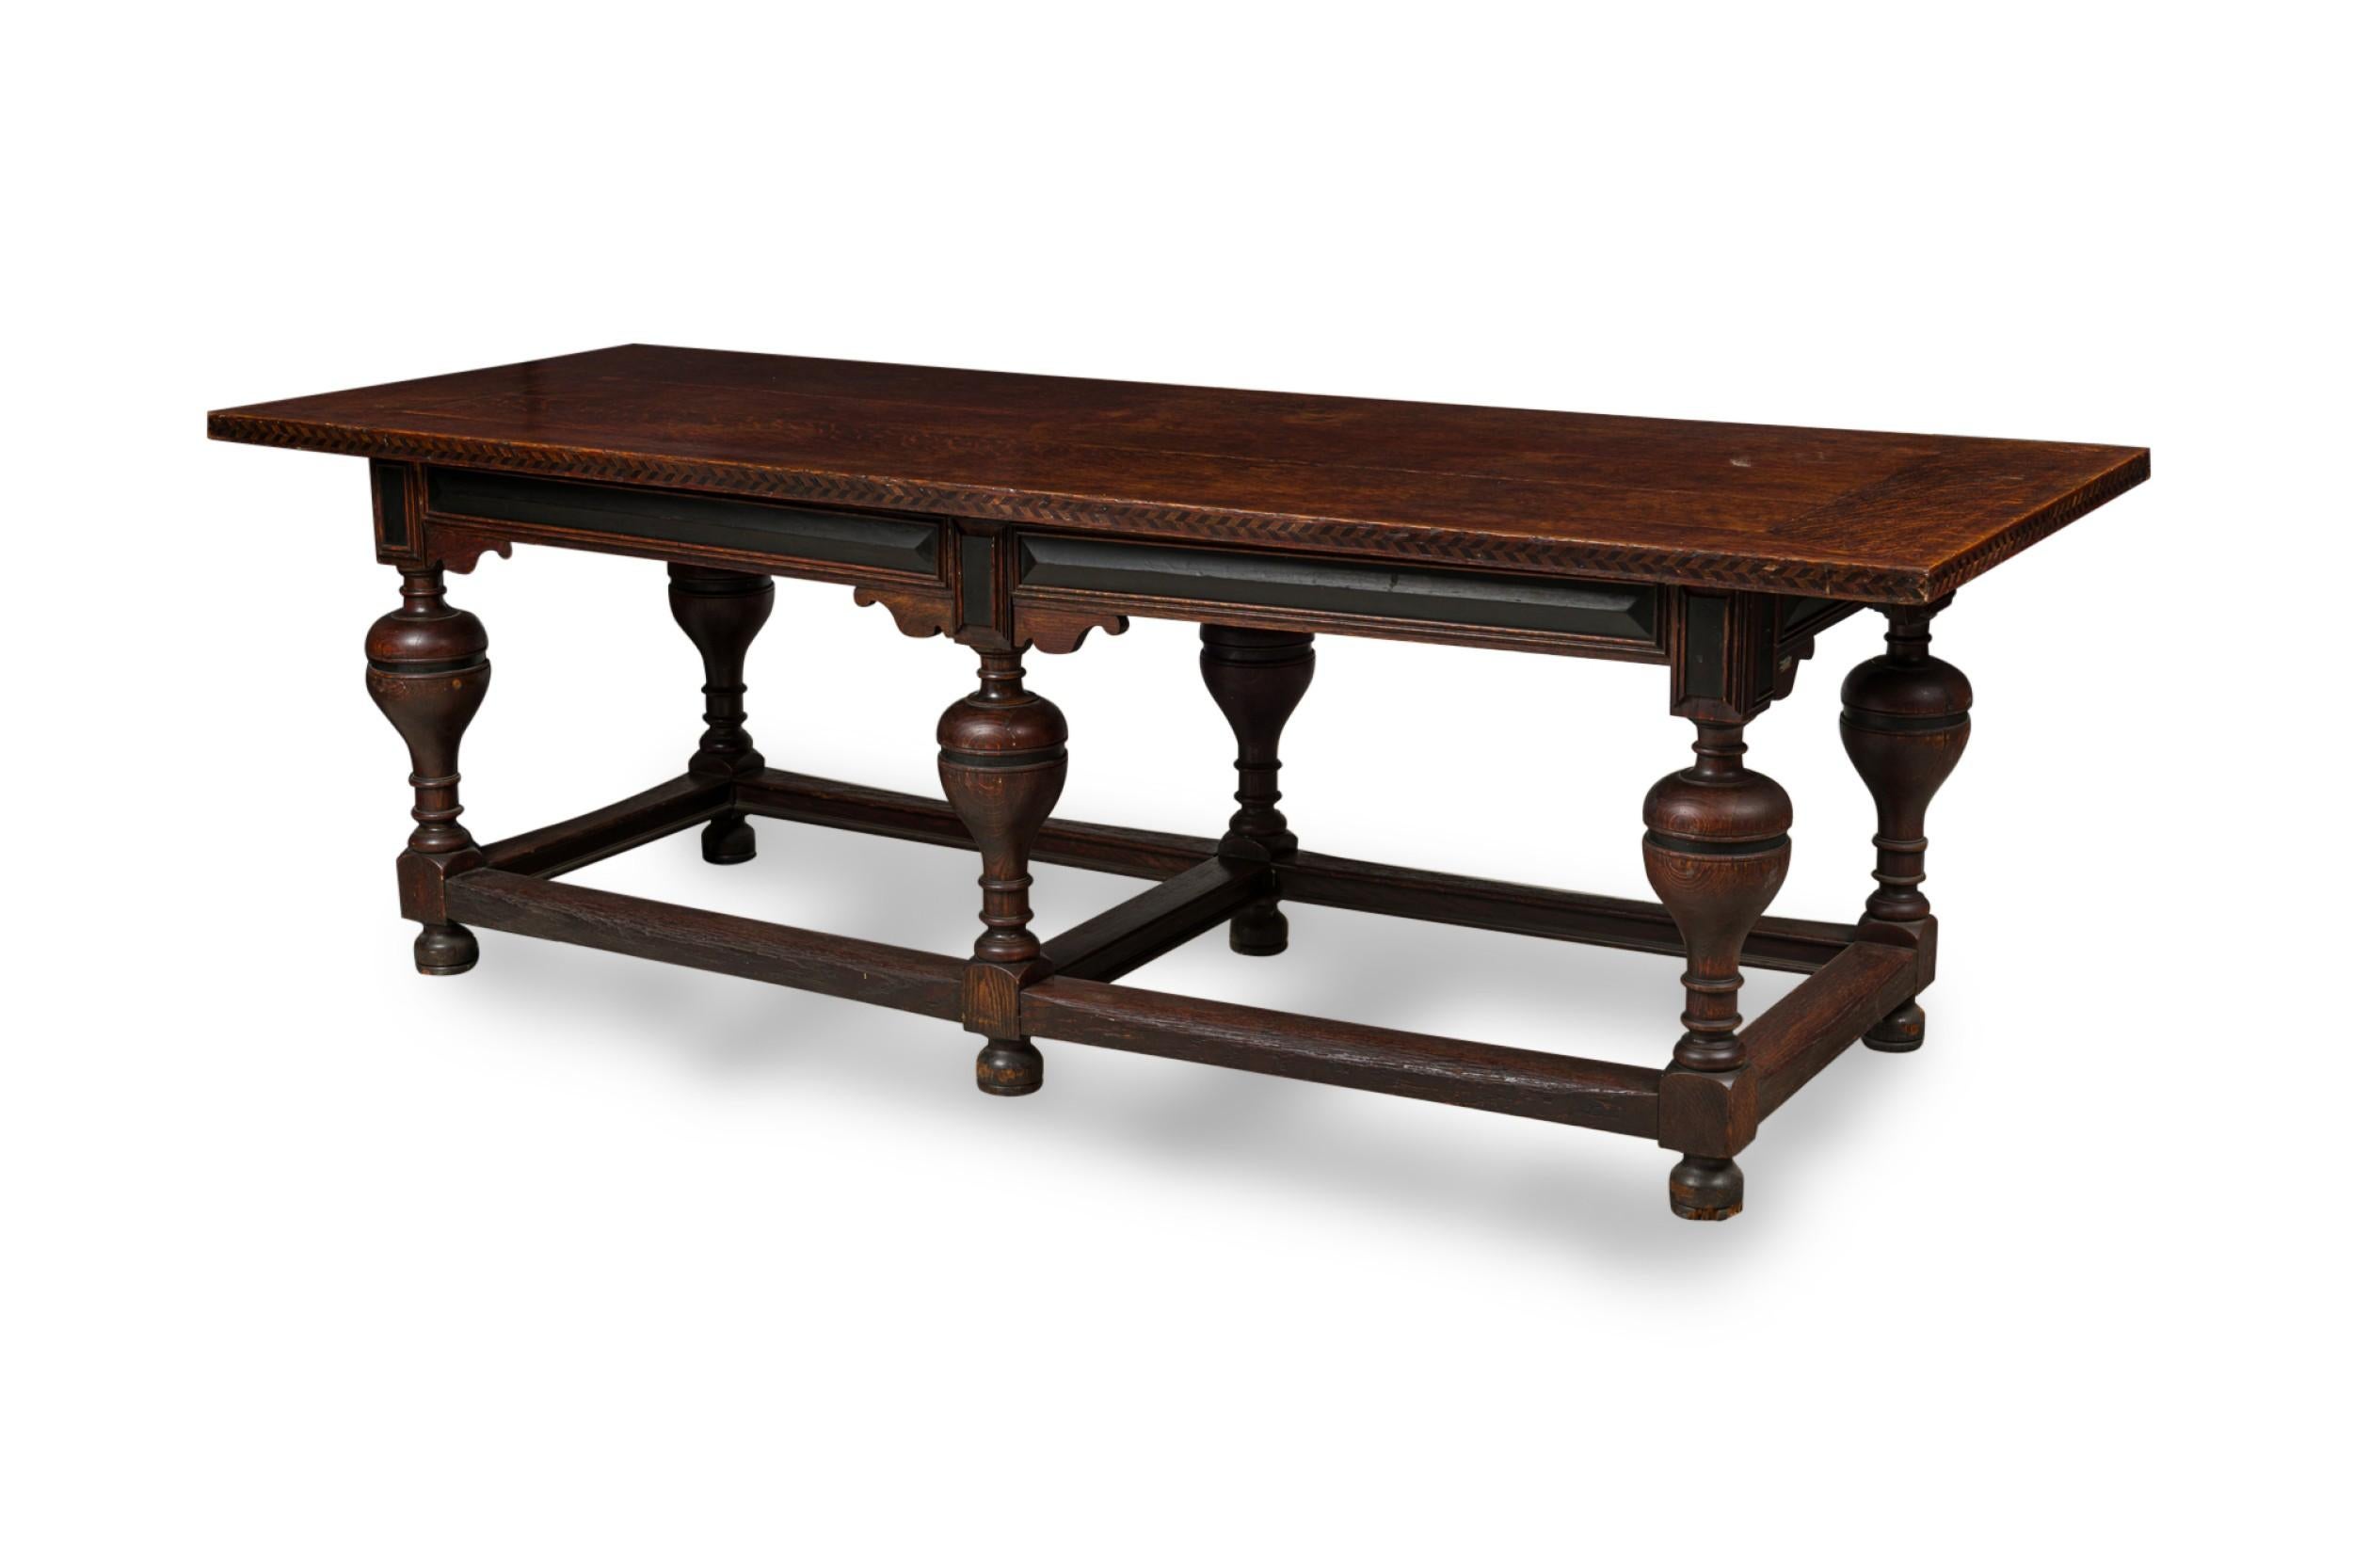 English Renaissance-style (20th century) oak refectory dining/conference table with a rectangular top featuring an inlaid border around the table top edge, resting on 6 turned legs connected by a stretcher.
 

 Discoloration
